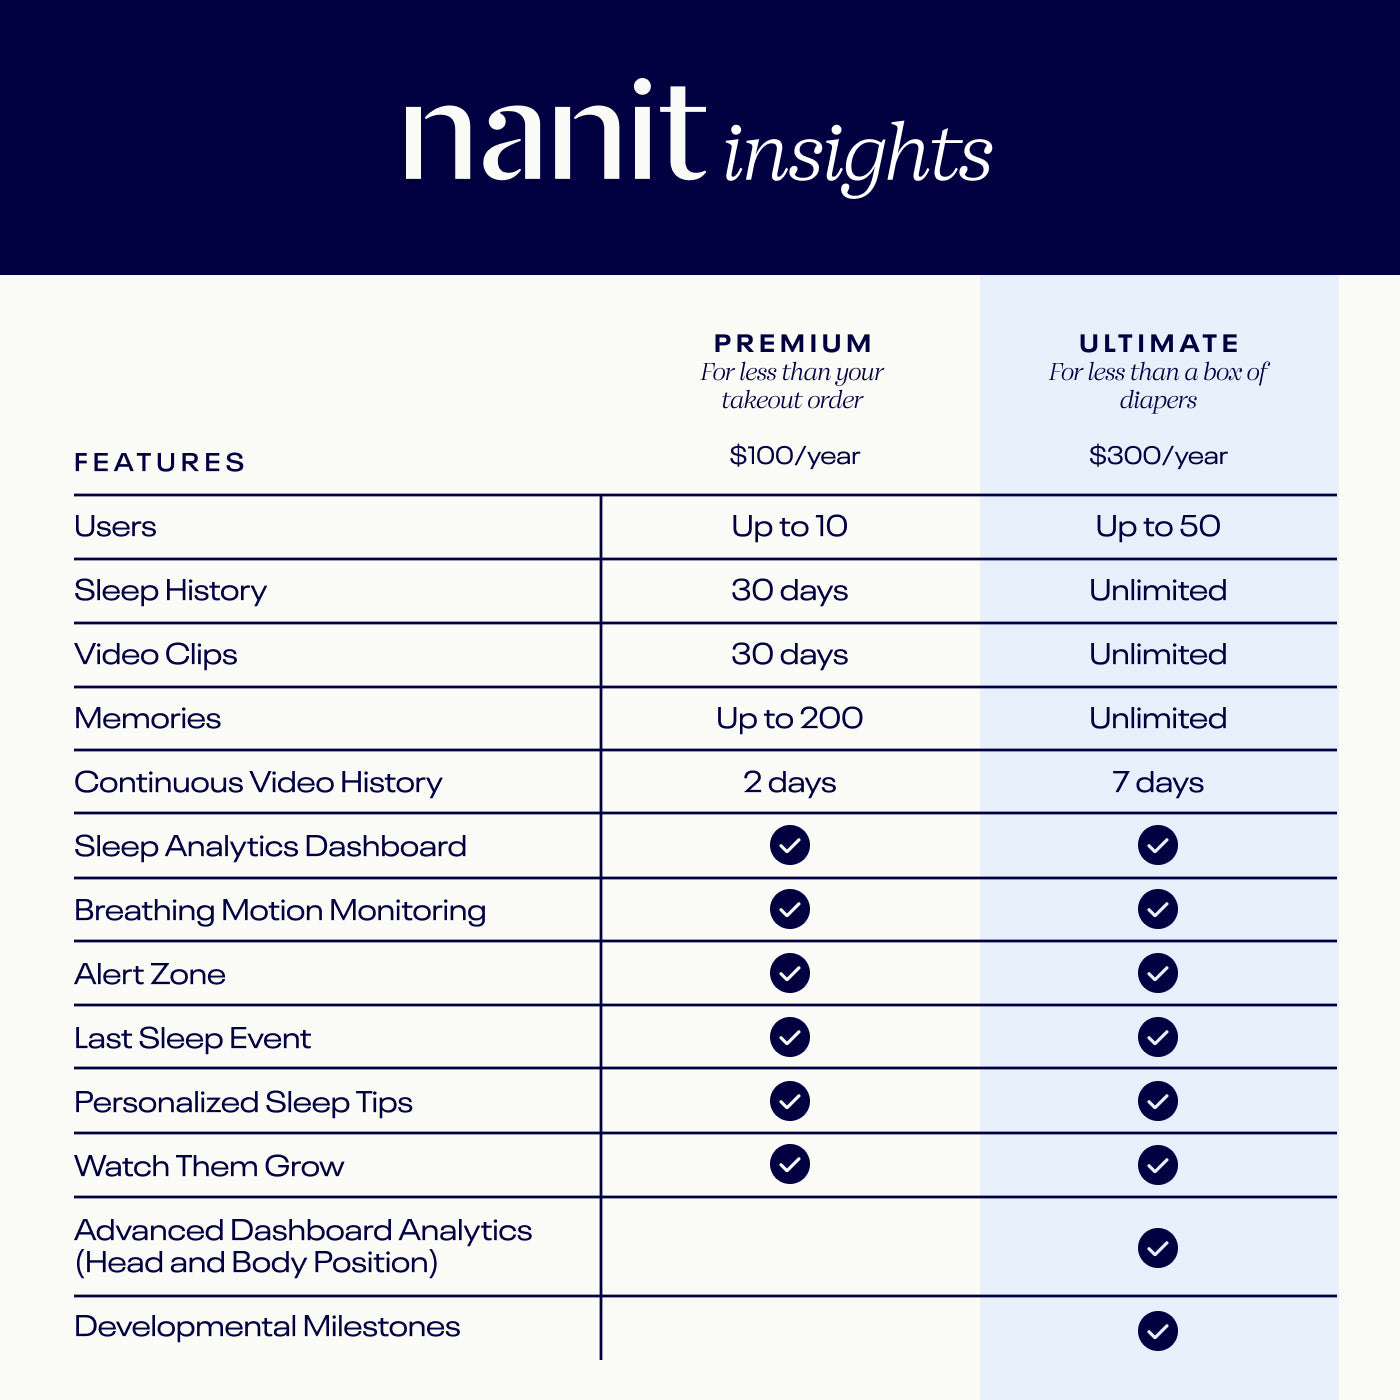 Nanit Insights Subscription Premium and Ultimate comparison features